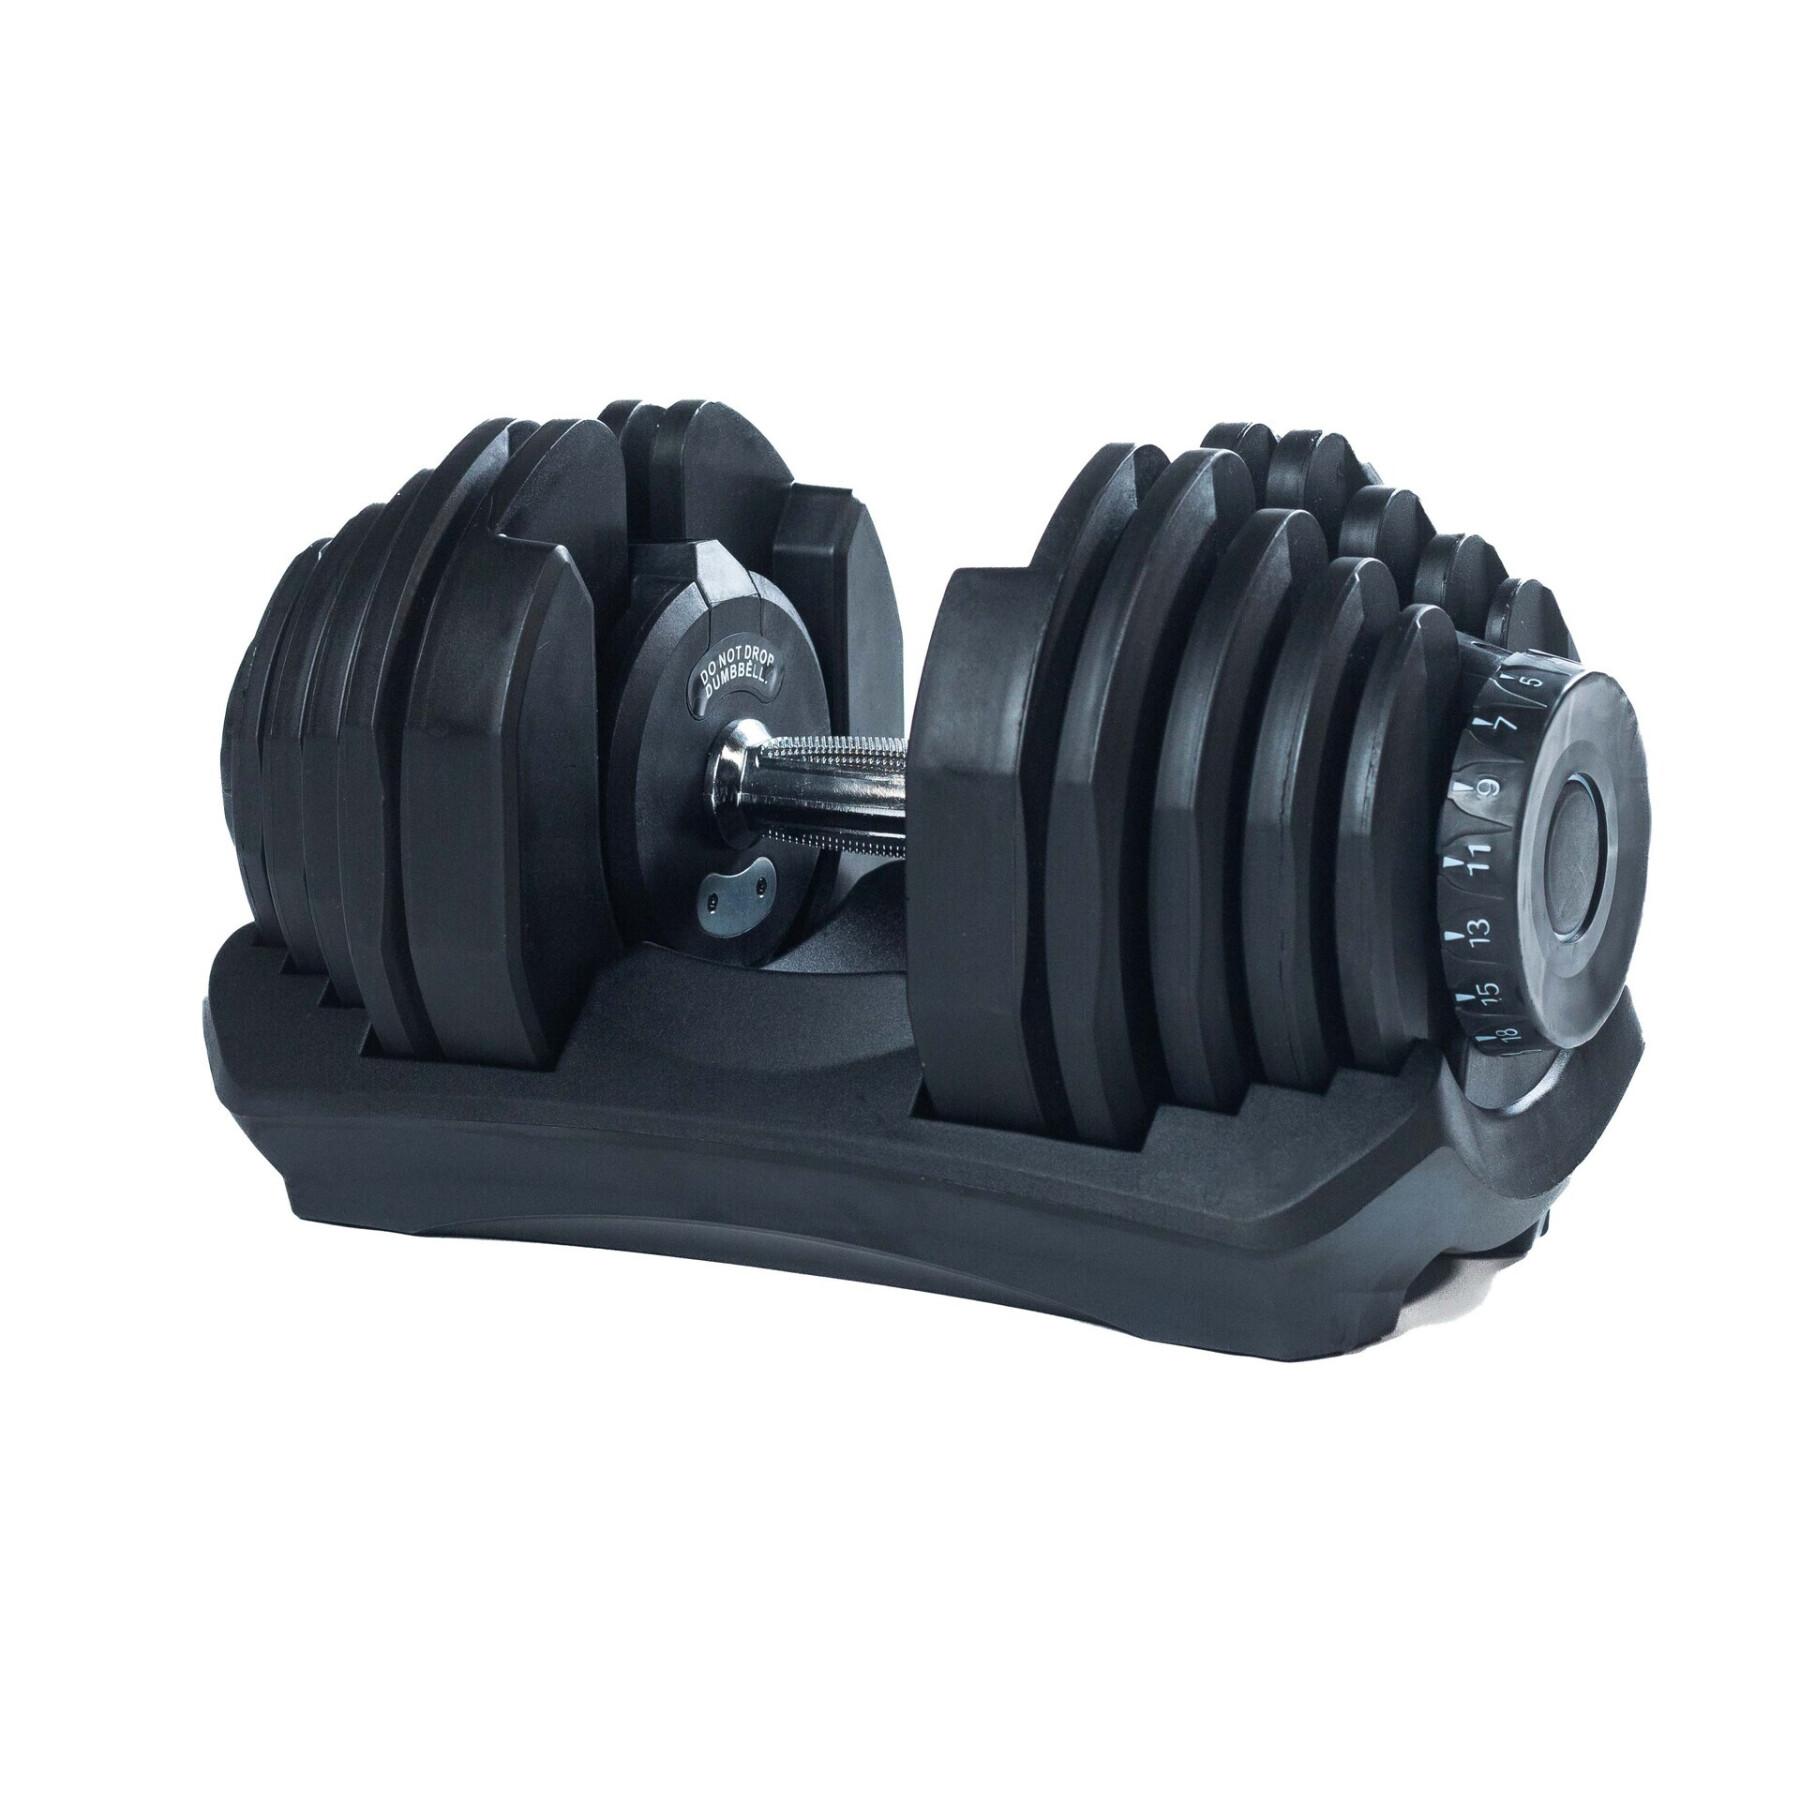 Adjustable dumbbell Boxpt